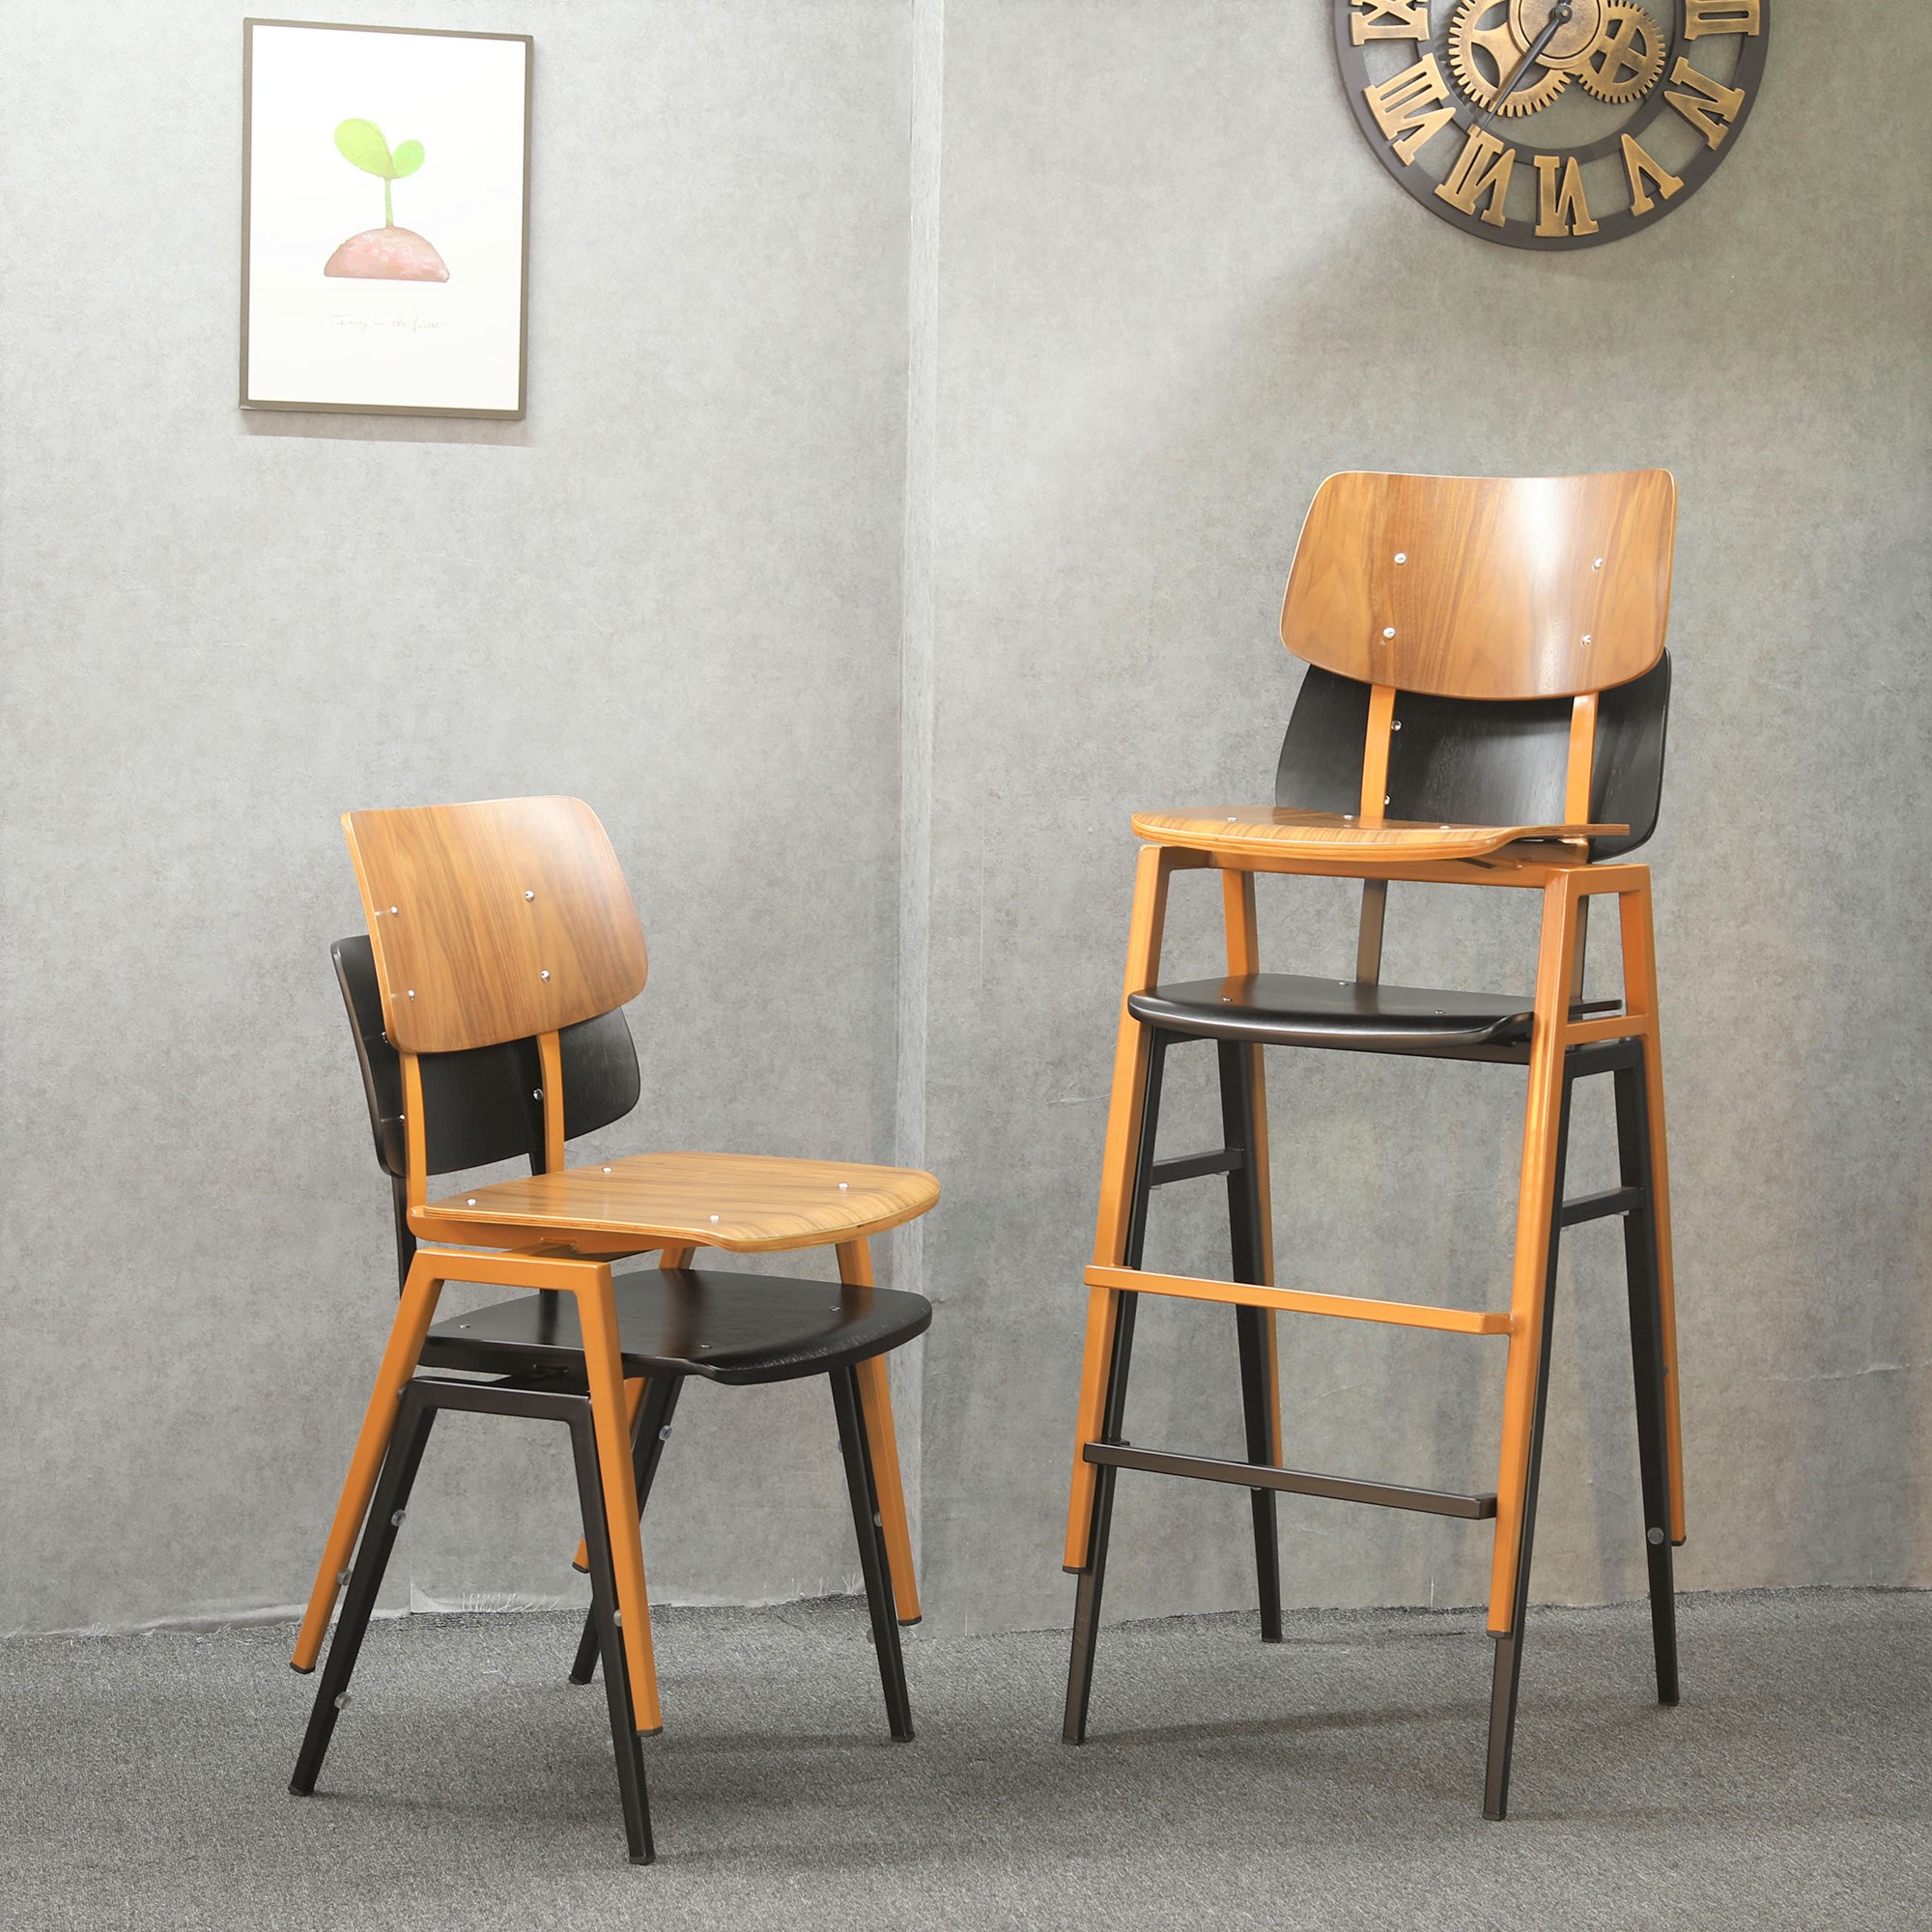 https://www.goldapplefurniture.com/stackable-modern-chairs-with-metal-legs-ga2901sc-45stw-product/